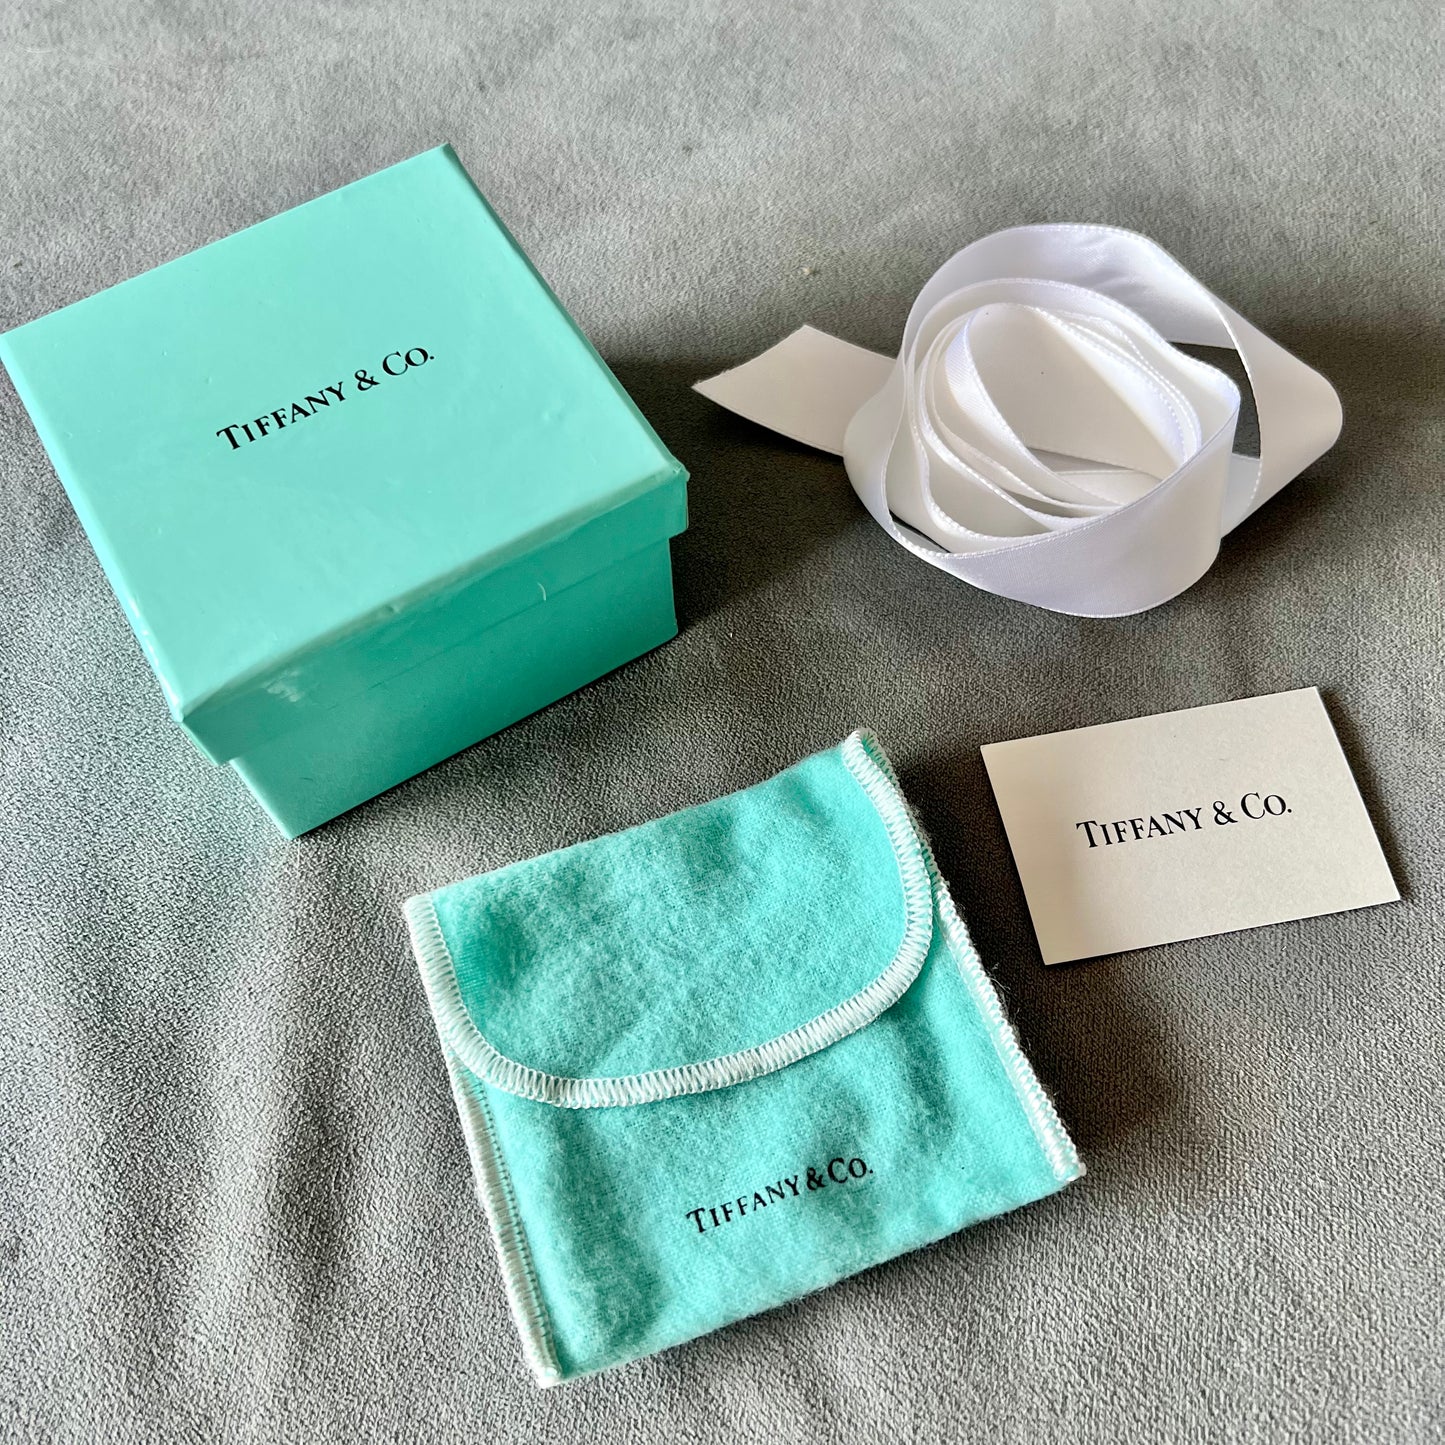 TIFFANY & CO. Jewelry Pouch + Booklet + Ribbon + Tissue + Box 3.20x3.20x2.10 inches